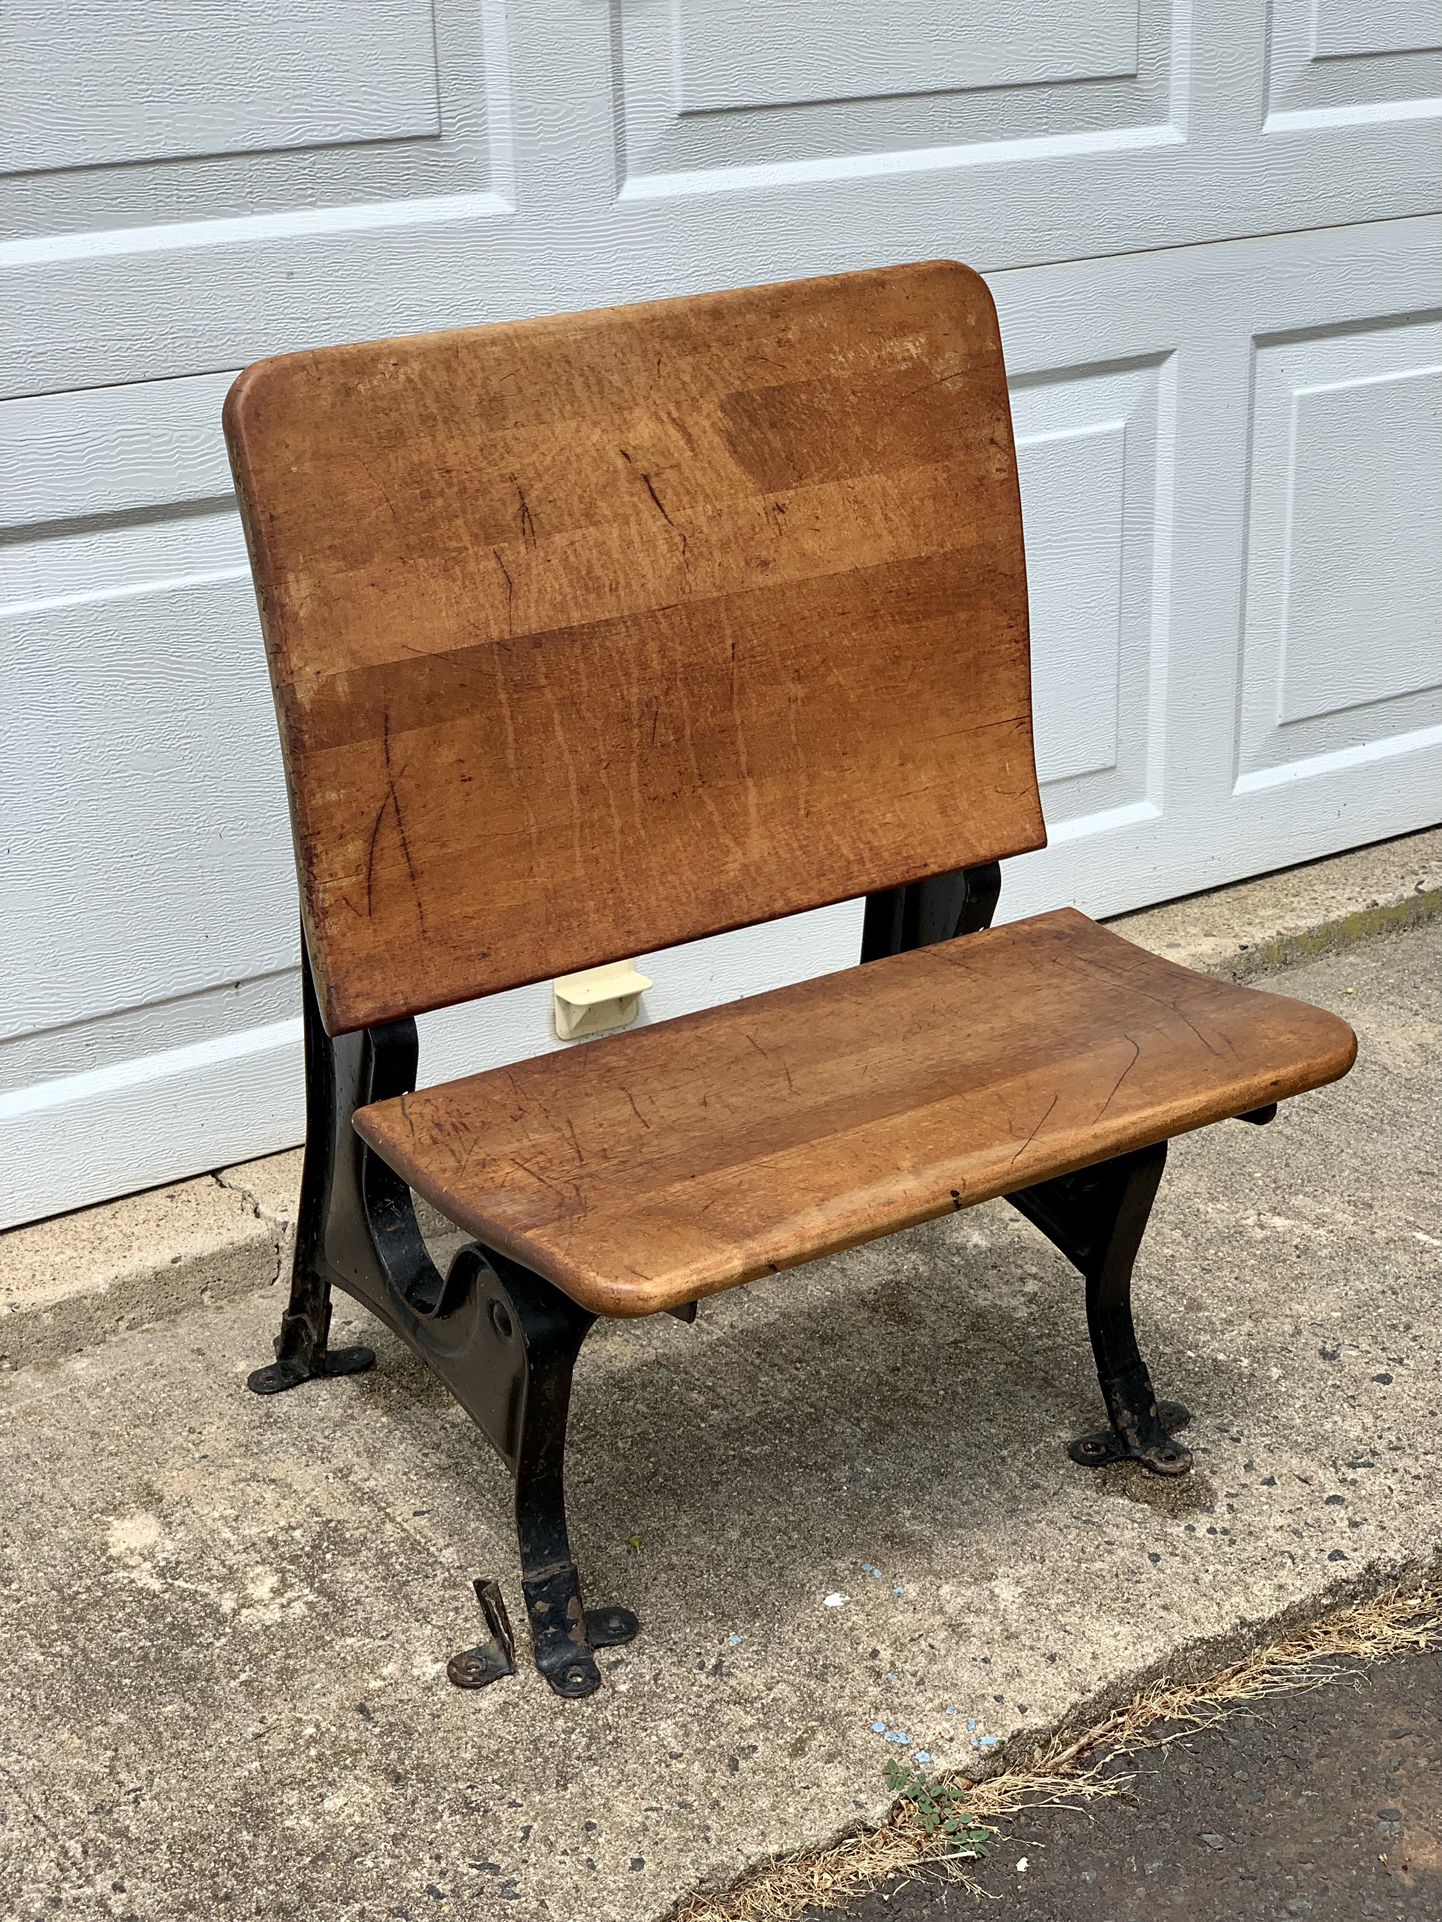 Antique Child’s Desk Chair, wood and metal, 25.5”h x 18”w x 21”d, one shoe has broken along a seam (see photos) but is repairable with epoxy or simila